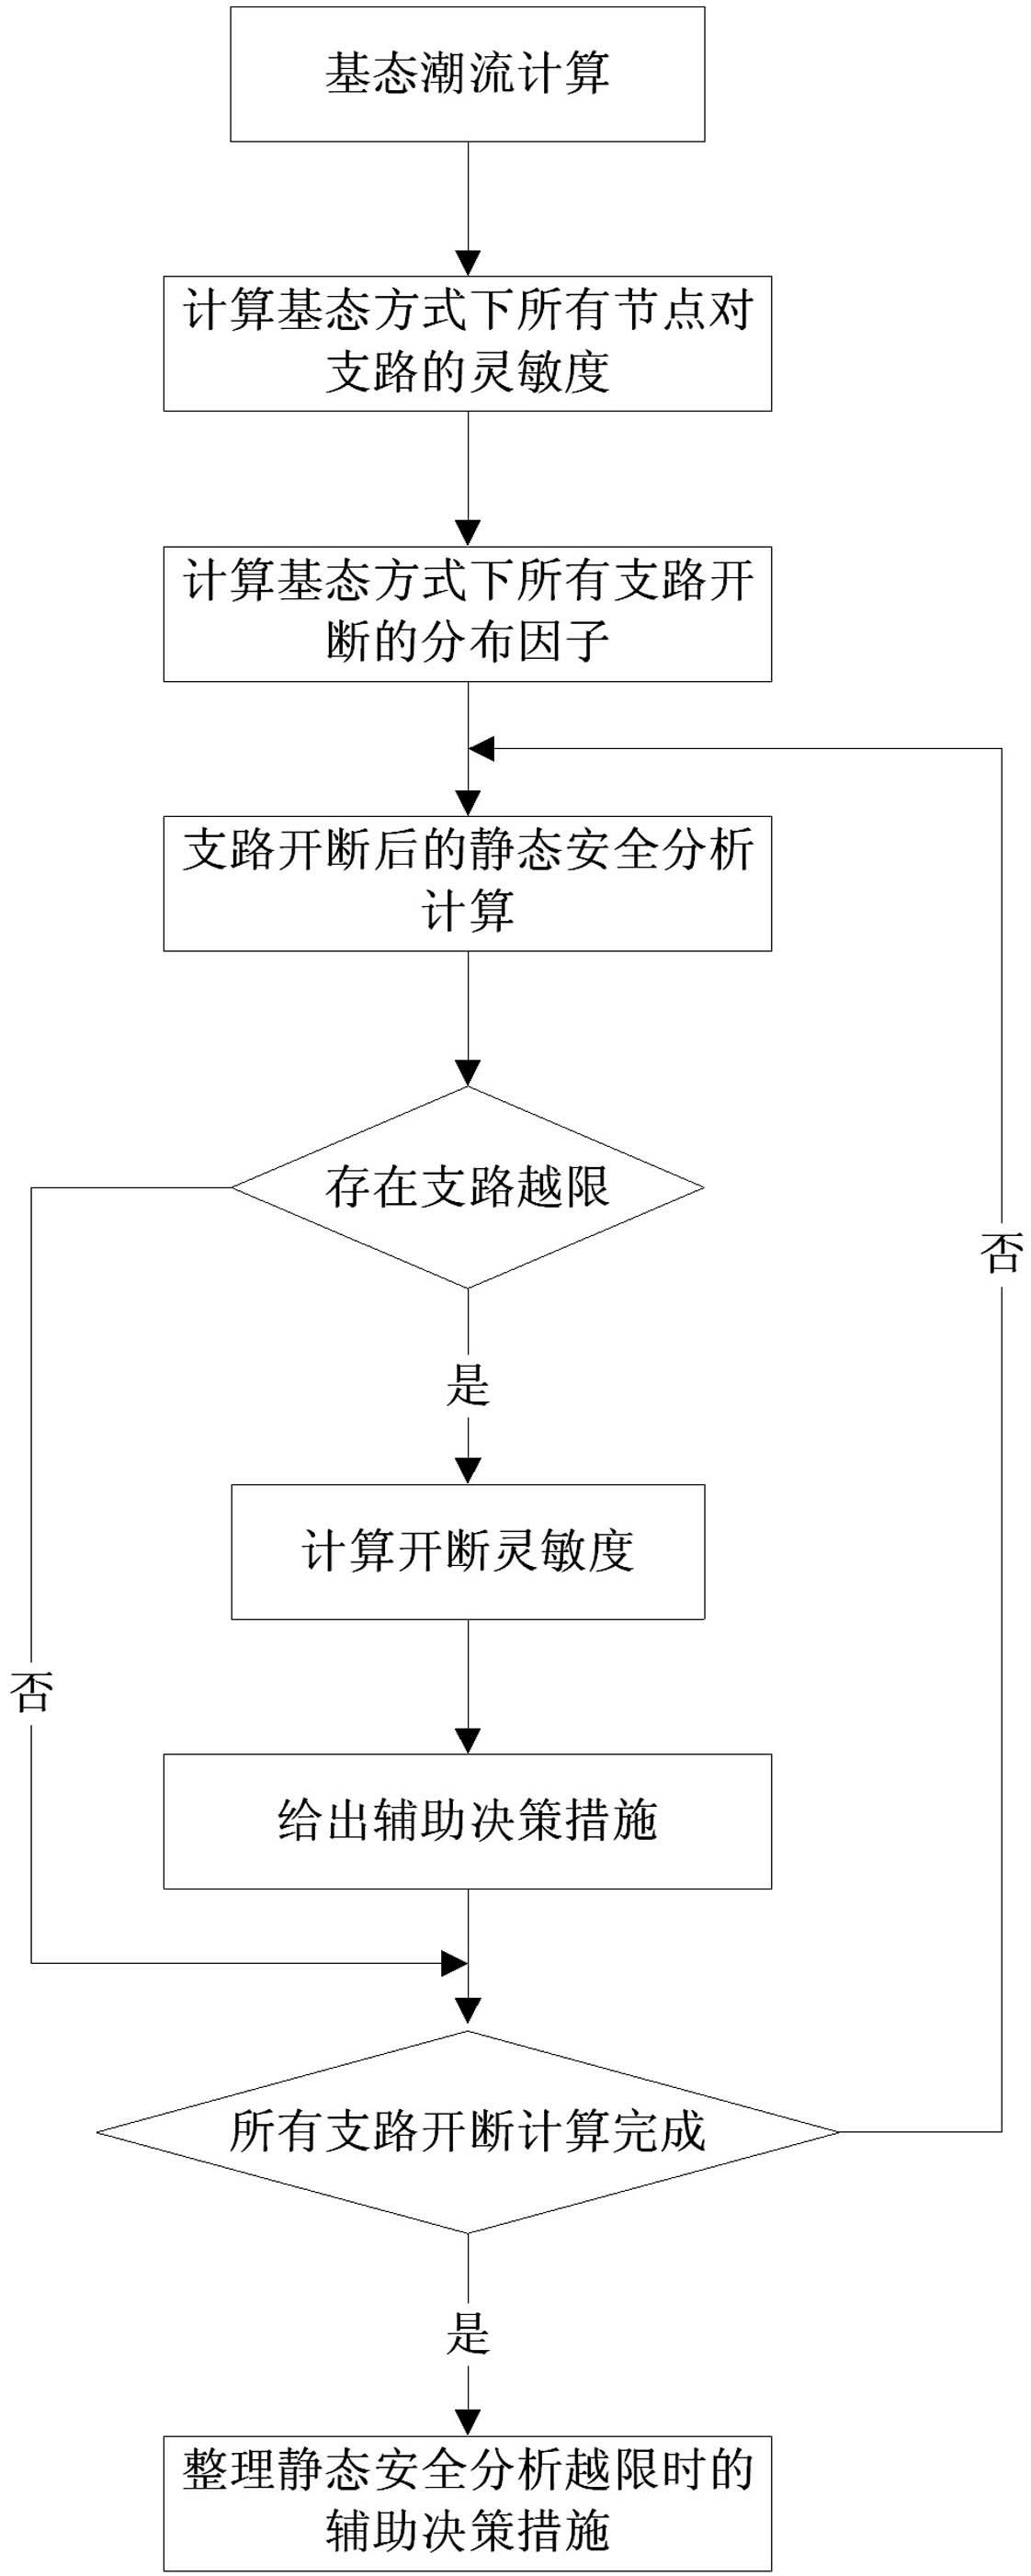 Aid decision making method for out-of-limit of static security analysis device